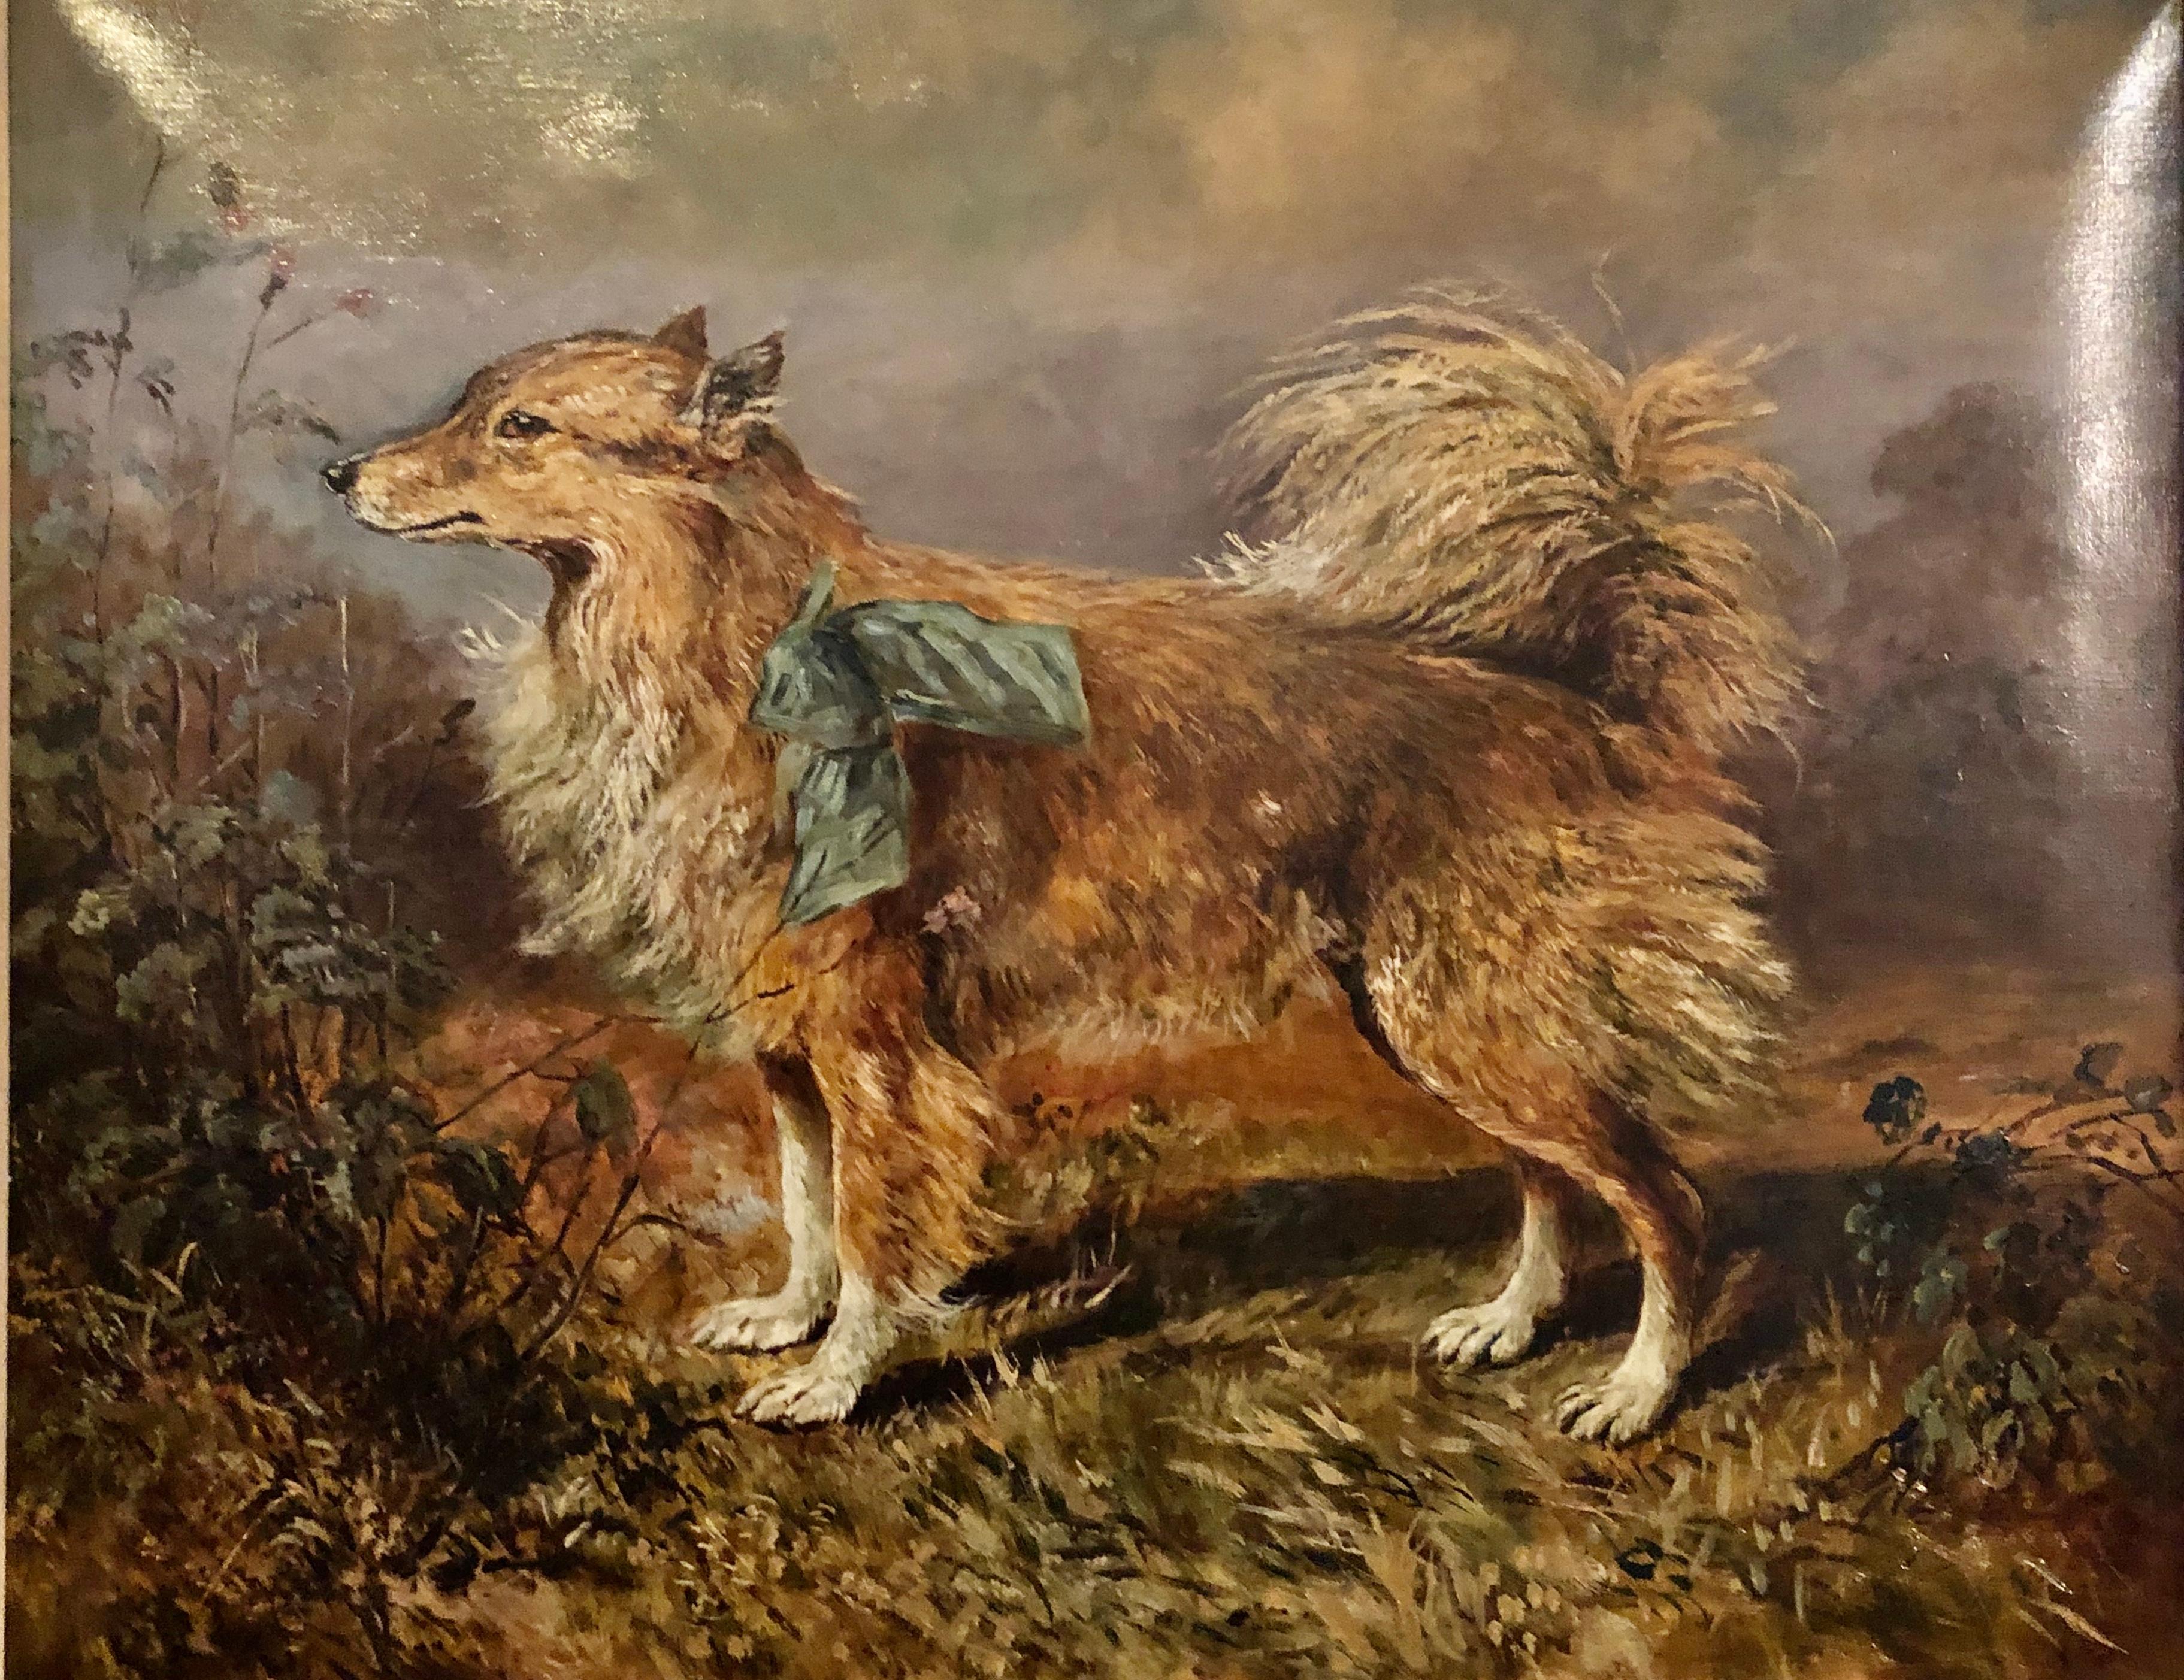 American Classical 19th-20th Century Oil on Canvas of a Dog in a Landscape by Raymond Dearn